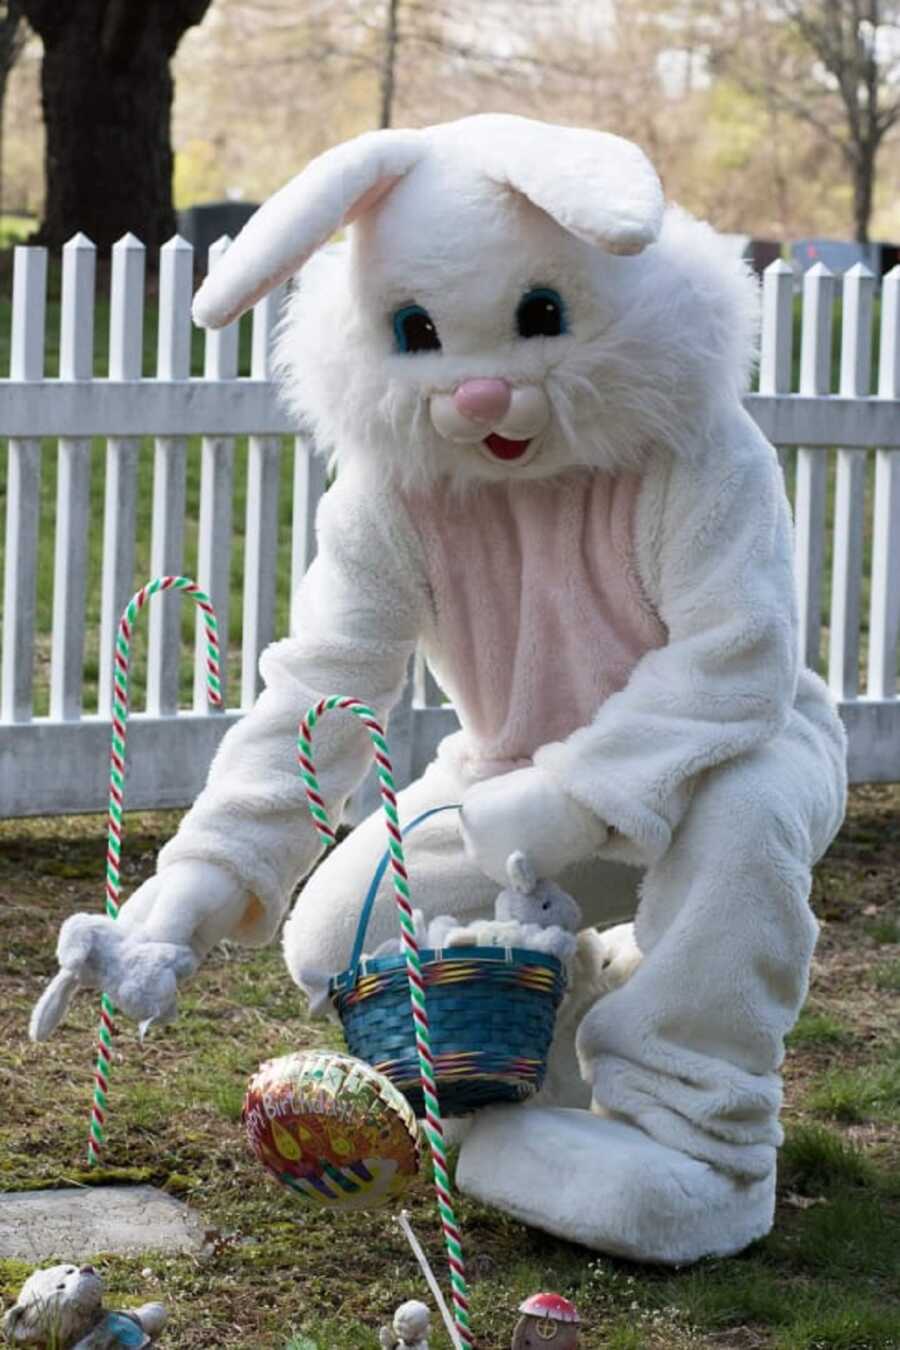 Easter bunny visits cemetery to leave gifts at graves of babies.